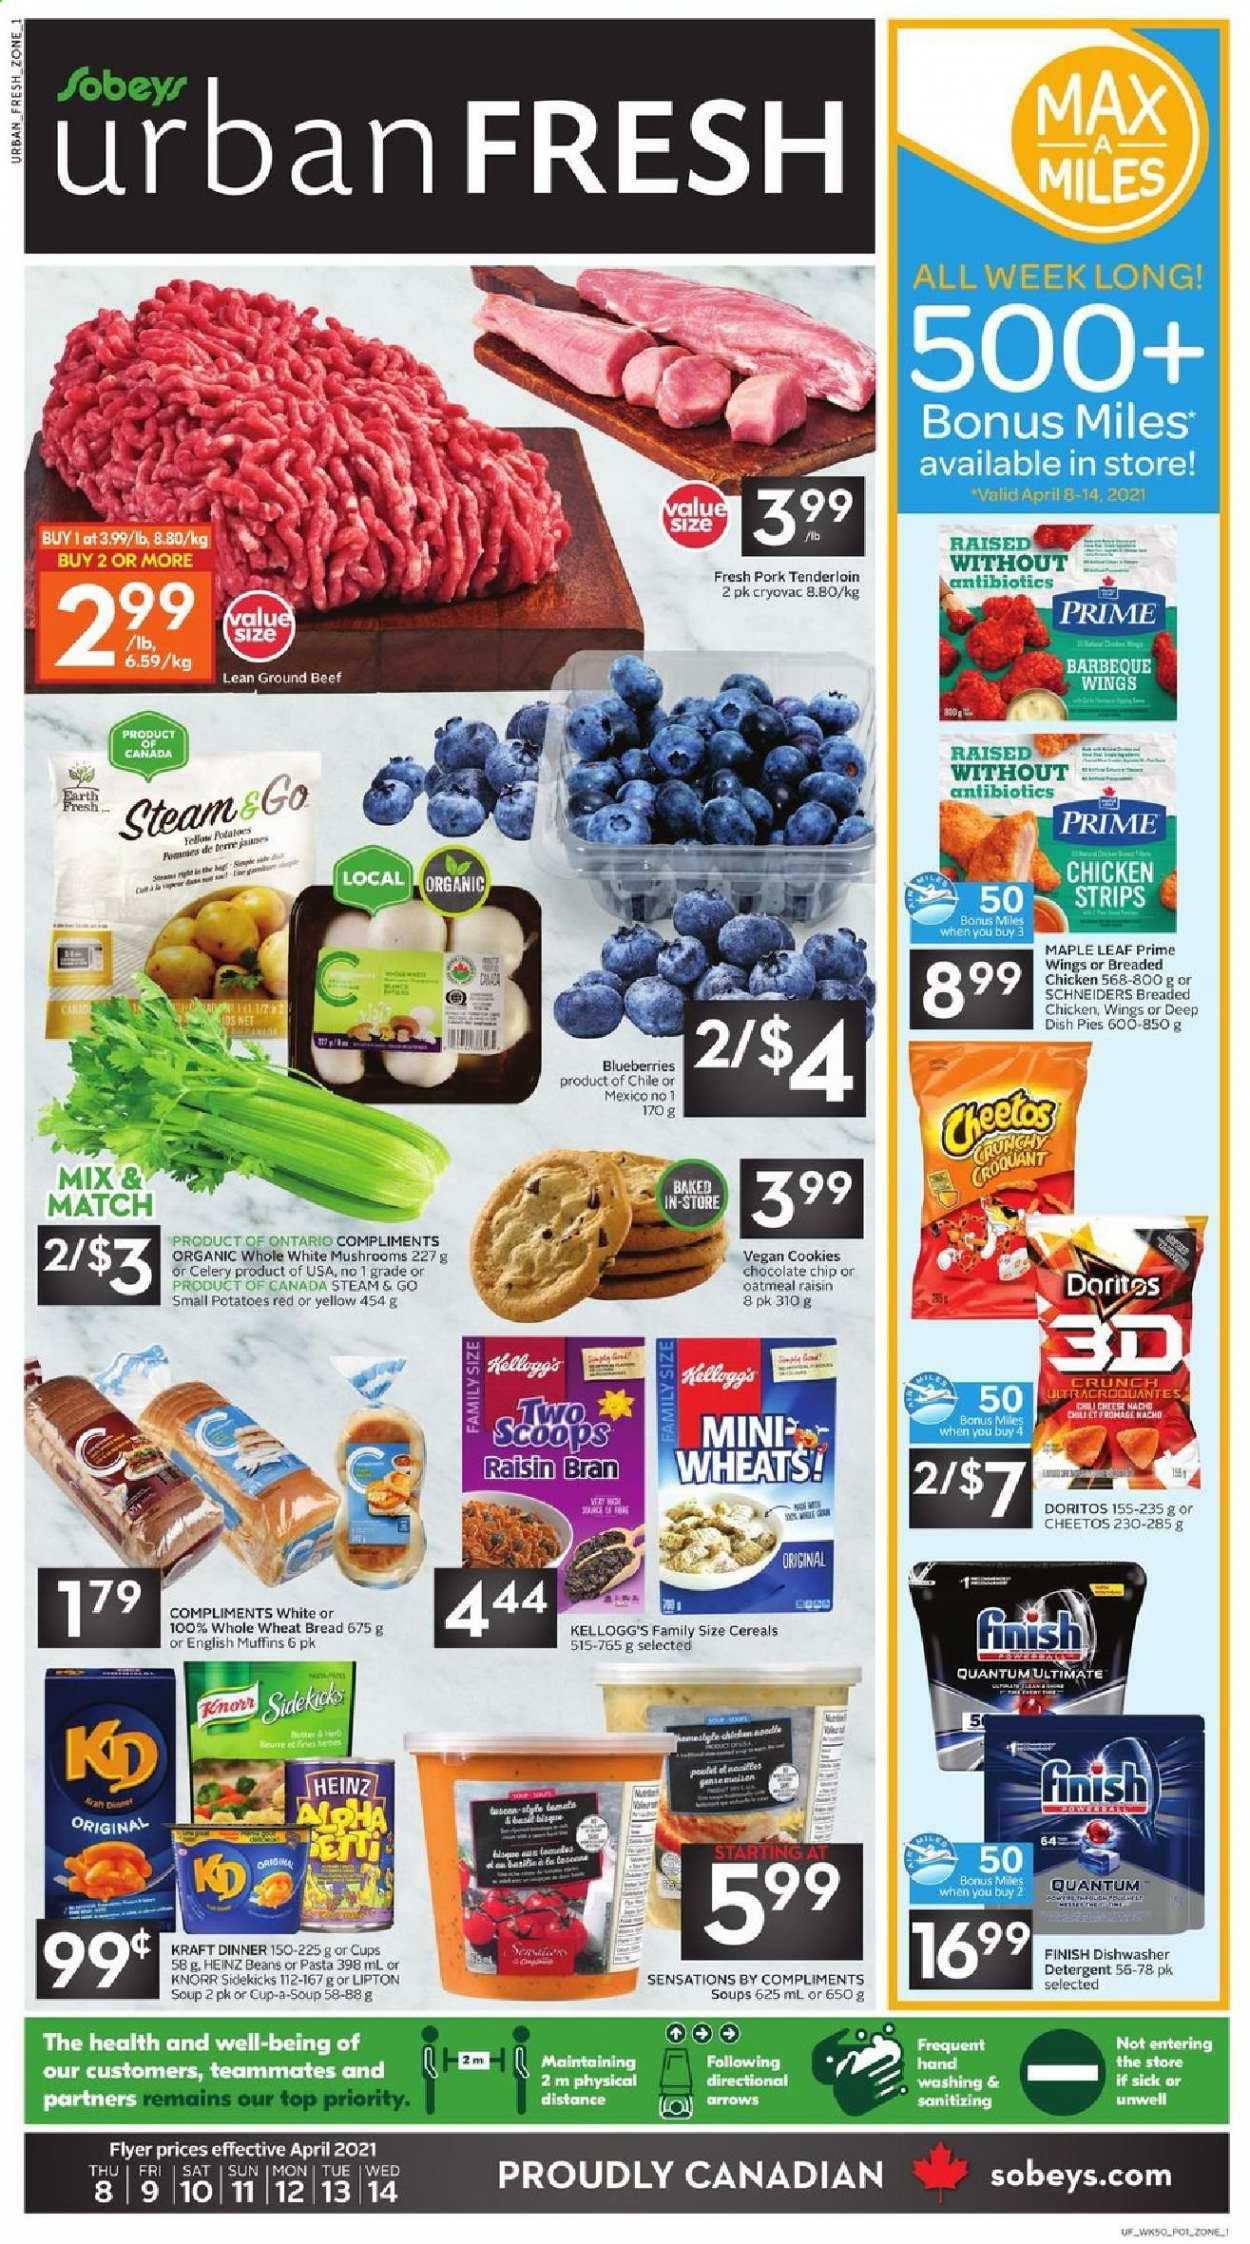 thumbnail - Sobeys Urban Fresh Flyer - April 08, 2021 - April 14, 2021 - Sales products - mushrooms, english muffins, wheat bread, beans, potatoes, blueberries, soup, fried chicken, Kraft®, cheese, strips, cookies, Kellogg's, Doritos, Cheetos, oatmeal, Heinz, Raisin Bran, beef meat, ground beef, pork meat, pork tenderloin, Finish Powerball, Finish Quantum Ultimate, Knorr. Page 1.